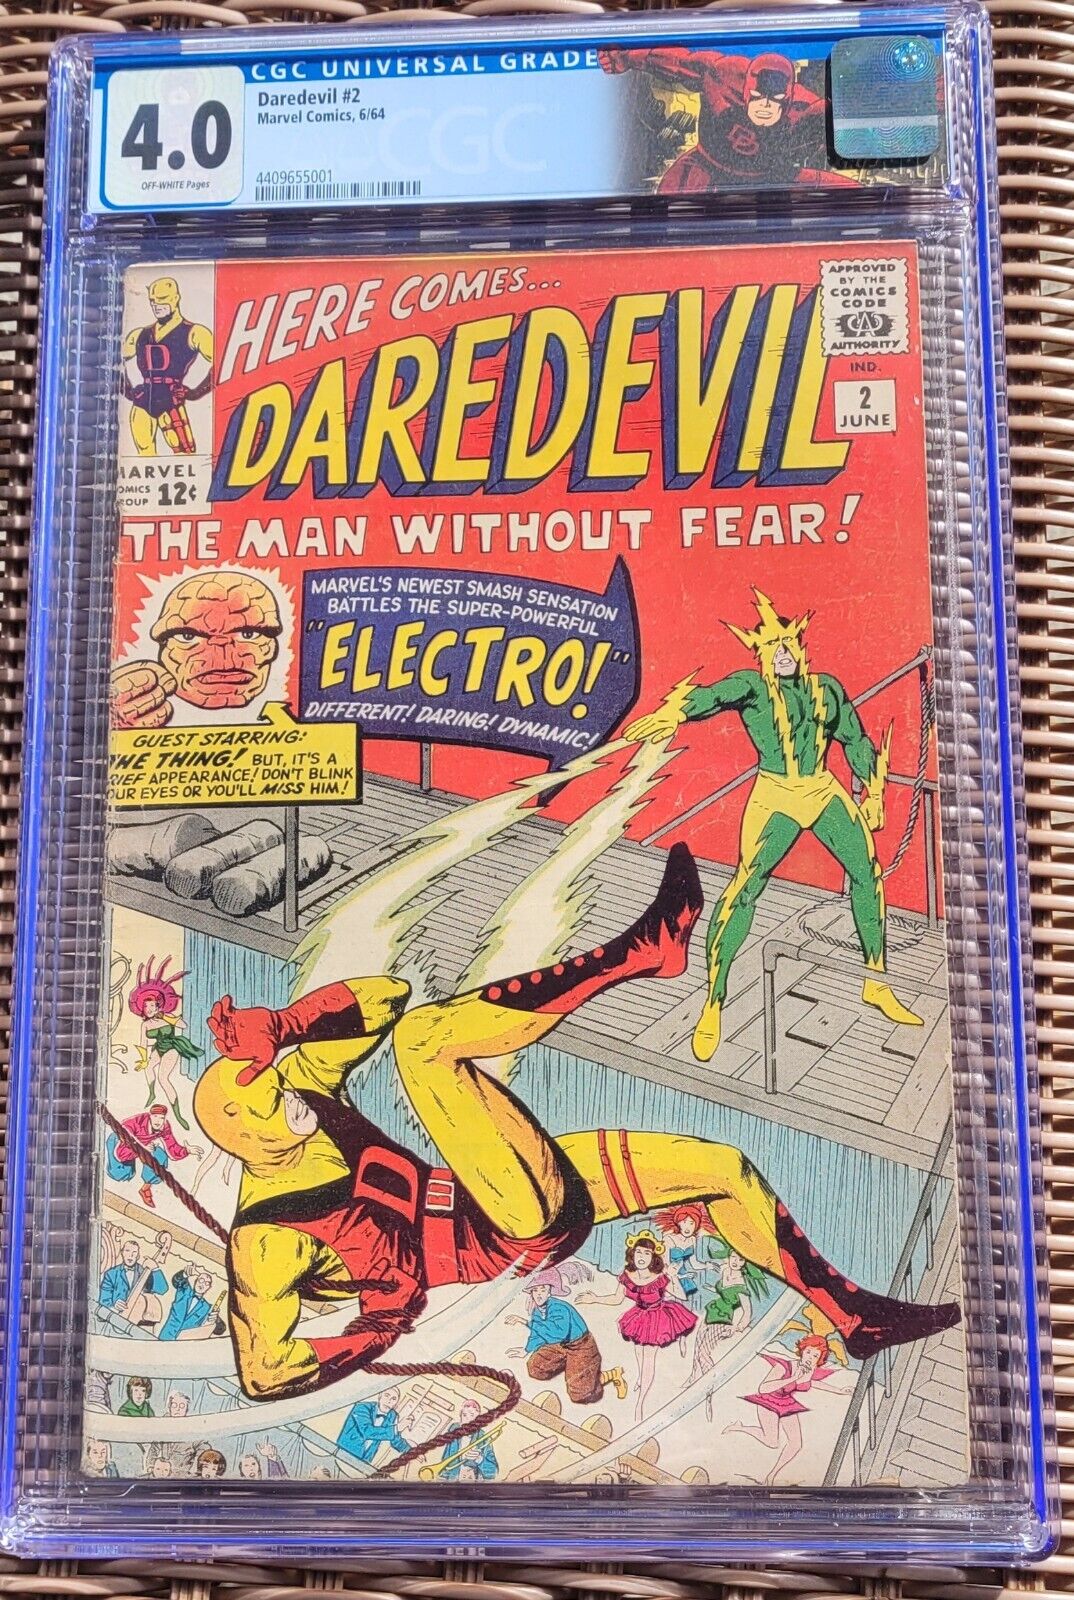 Daredevil (1964) #2 CGC 4.0 2nd Appearance Daredevil Electro Kirby Cover